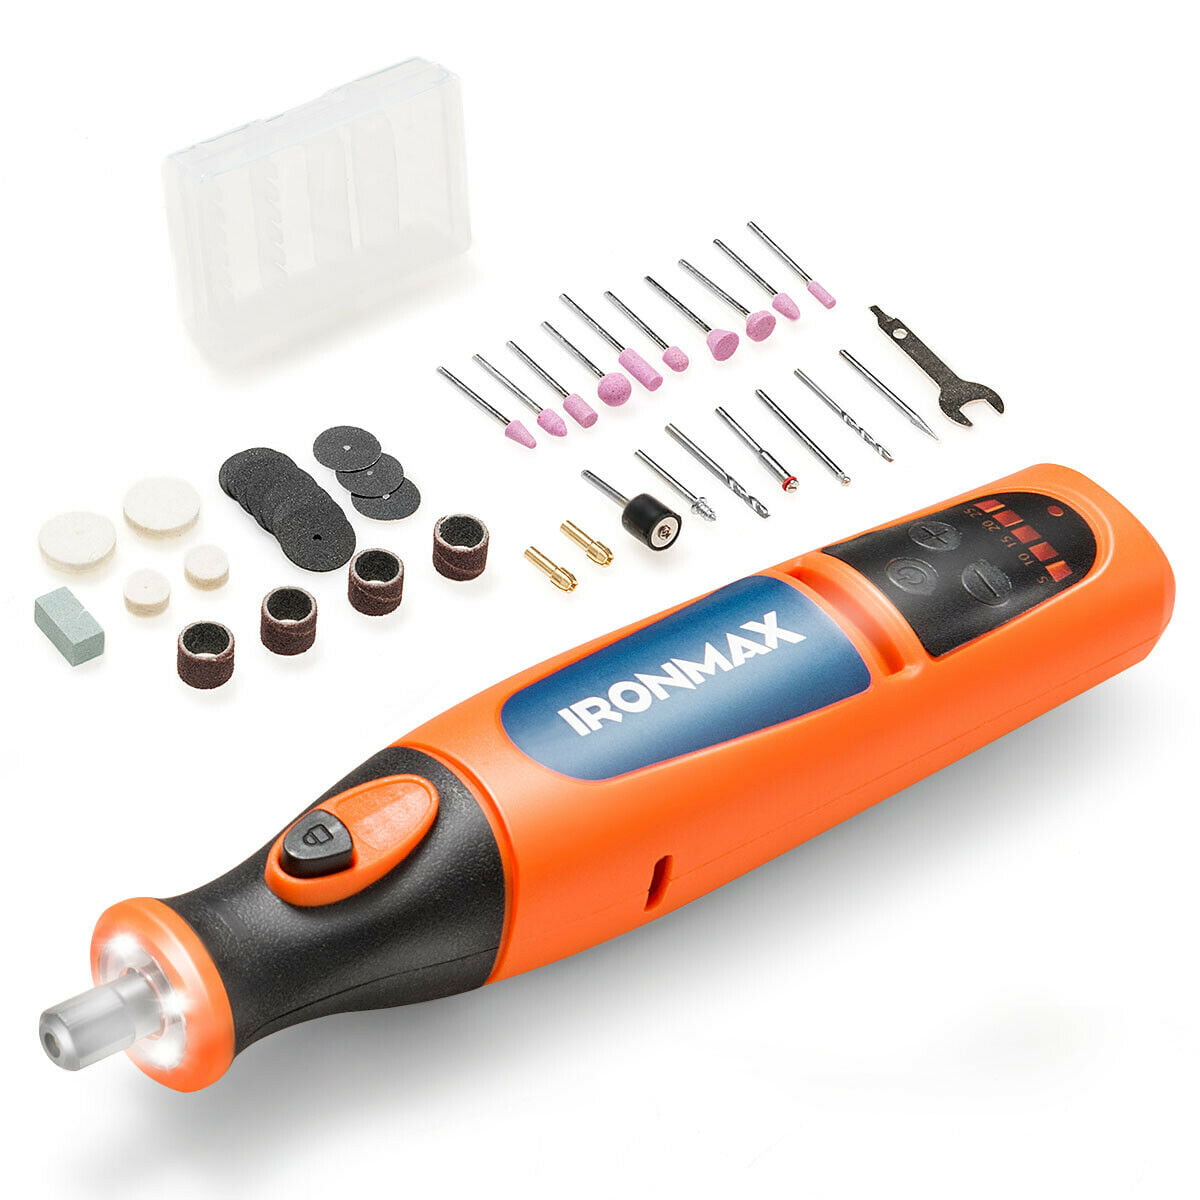 Cordless Rotary Tool Kit Lithium-Ion Battery Powered 3 Speed w /40  Accessories - Orange+Black